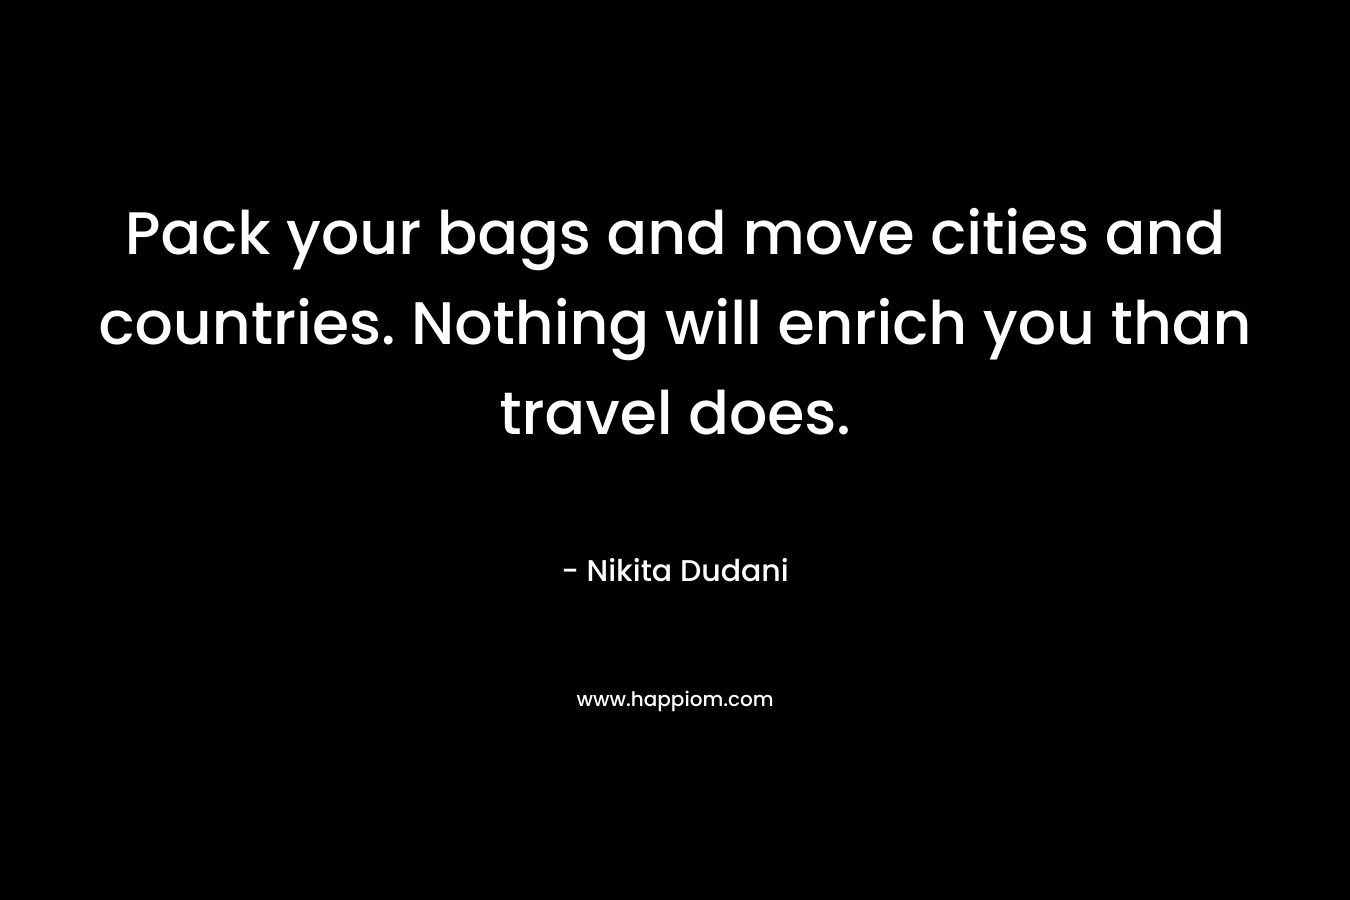 Pack your bags and move cities and countries. Nothing will enrich you than travel does. – Nikita Dudani